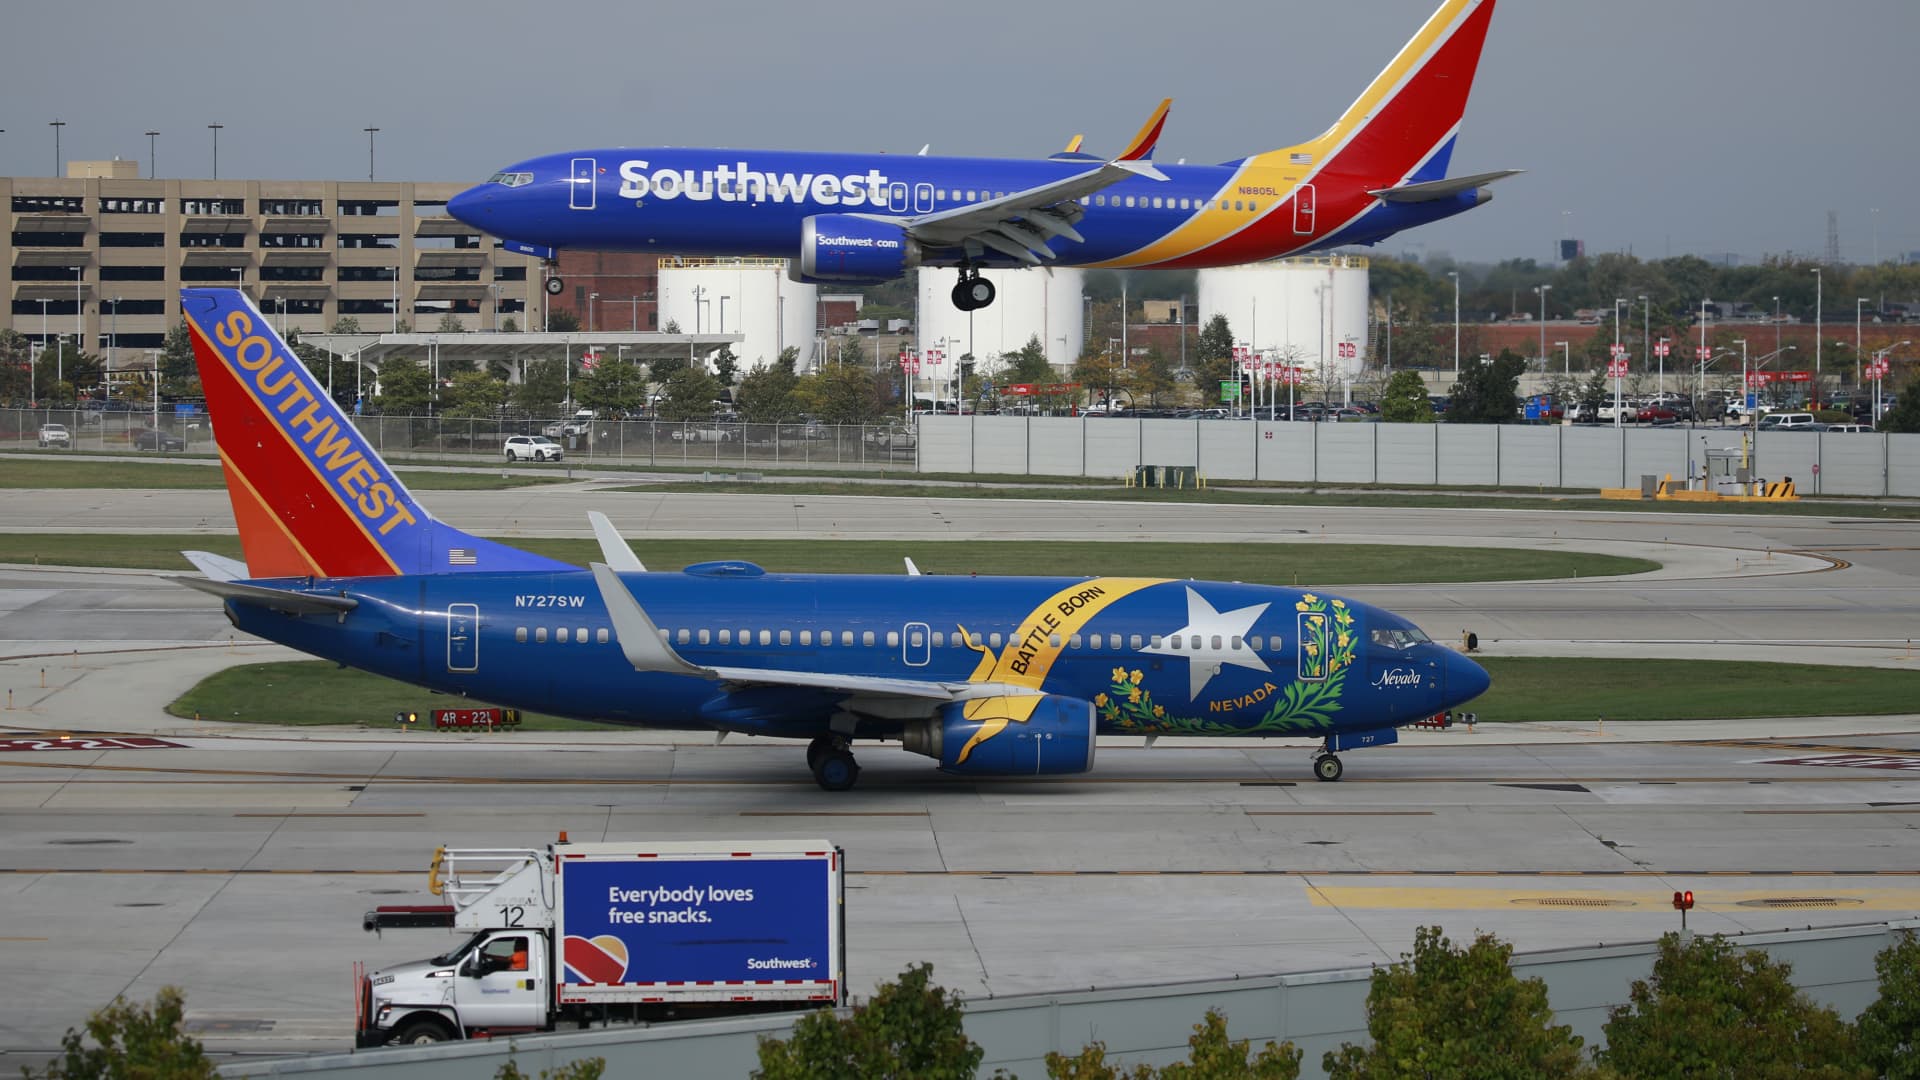 A Southwest Airlines Co. Boeing 737 passenger jet arrives at Midway International Airport (MDW) in Chicago, Illinois, U.S., on Monday, Oct. 11, 2021.